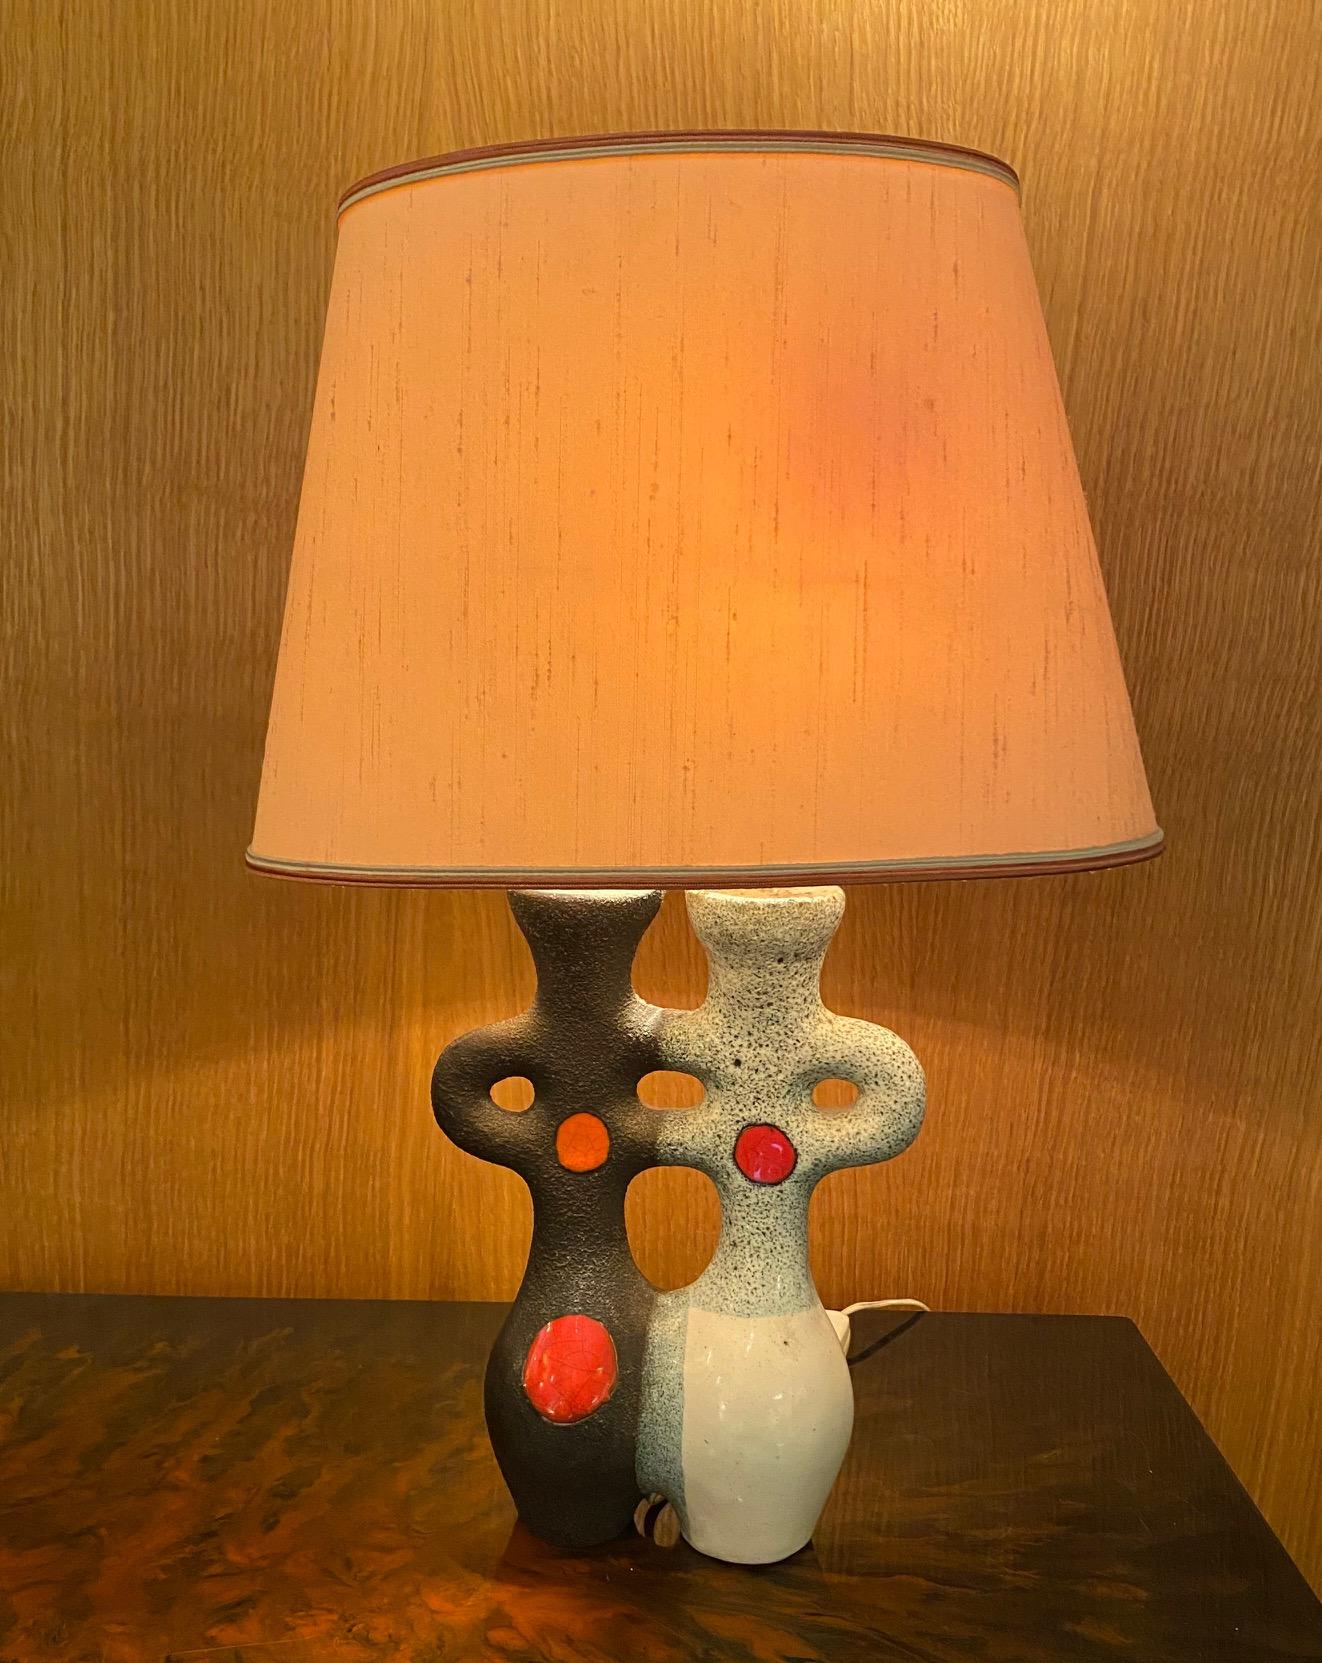 Mid-20th Century Ceramic Table Lamp by Les Archanges/Gilbert Valentin, Vallauris, France, 1950s For Sale